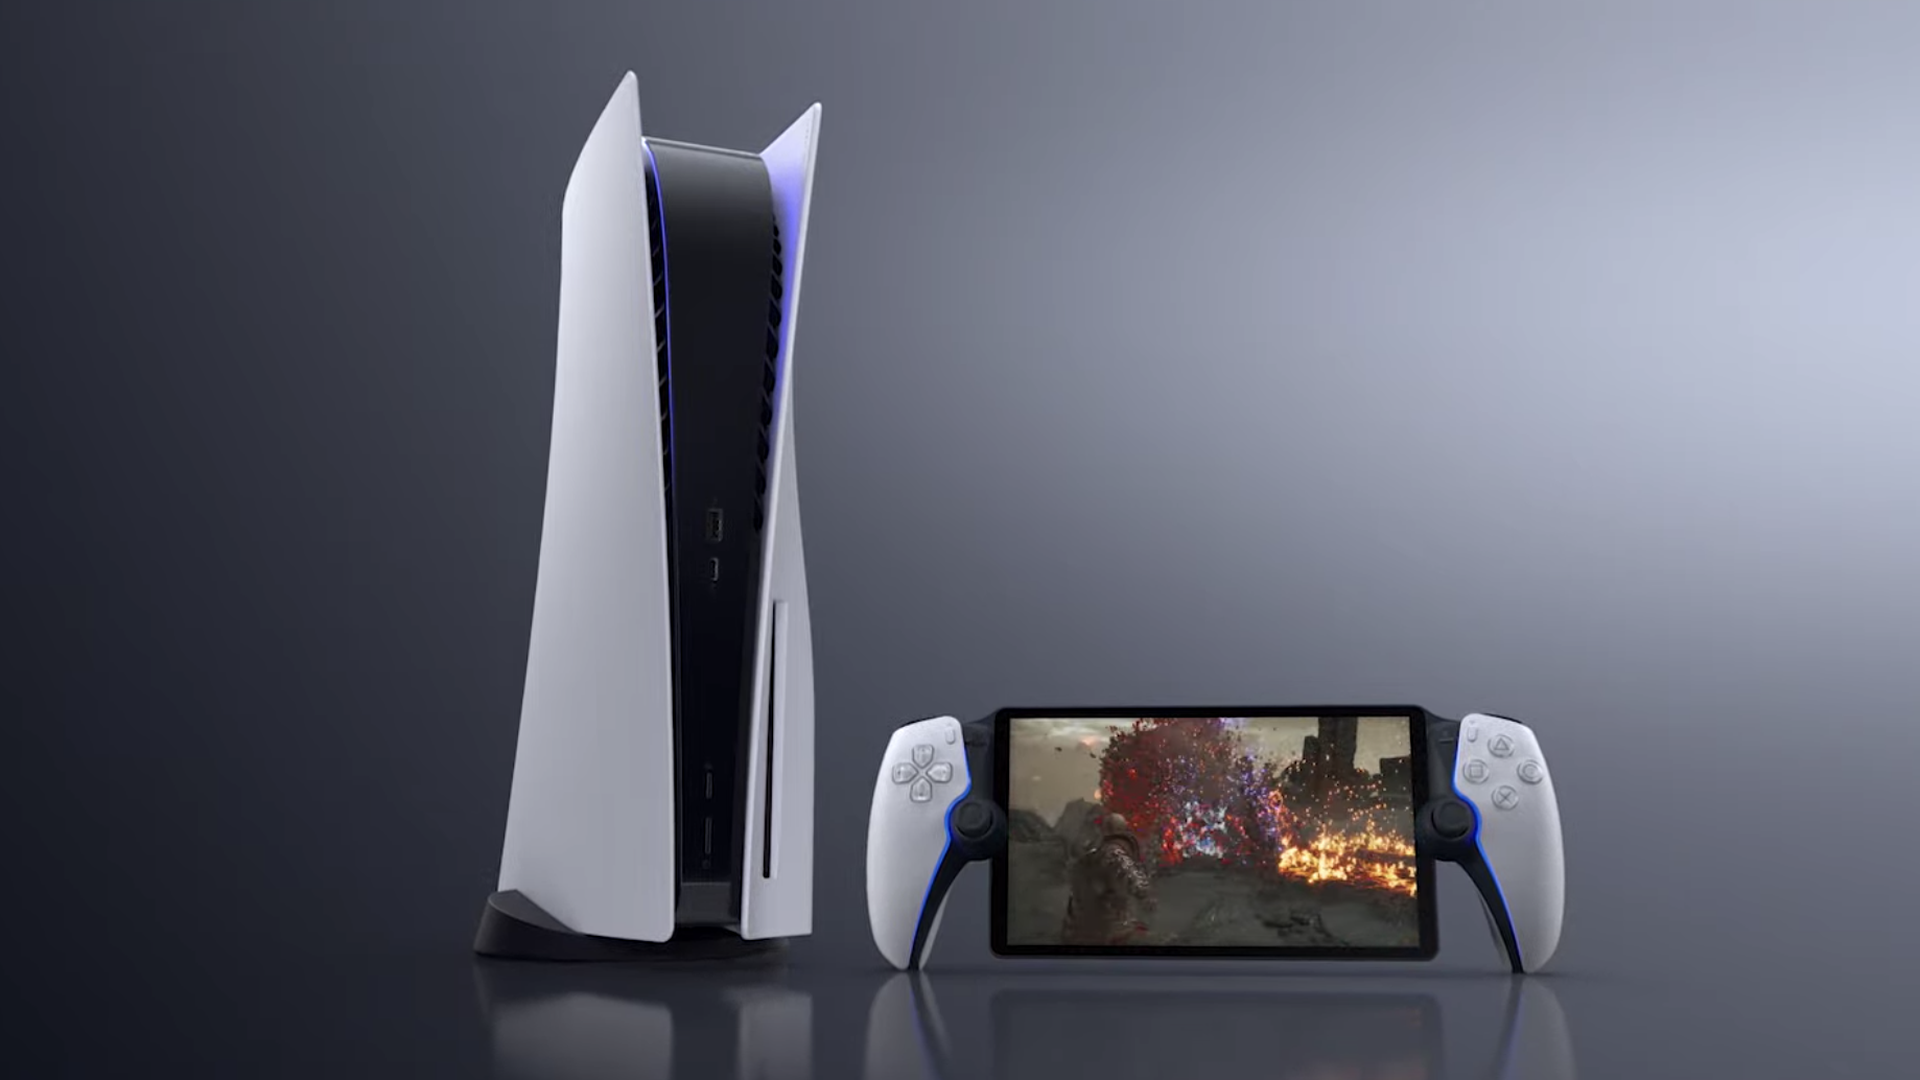 Meet Project Q, PlayStation's new portable streaming console